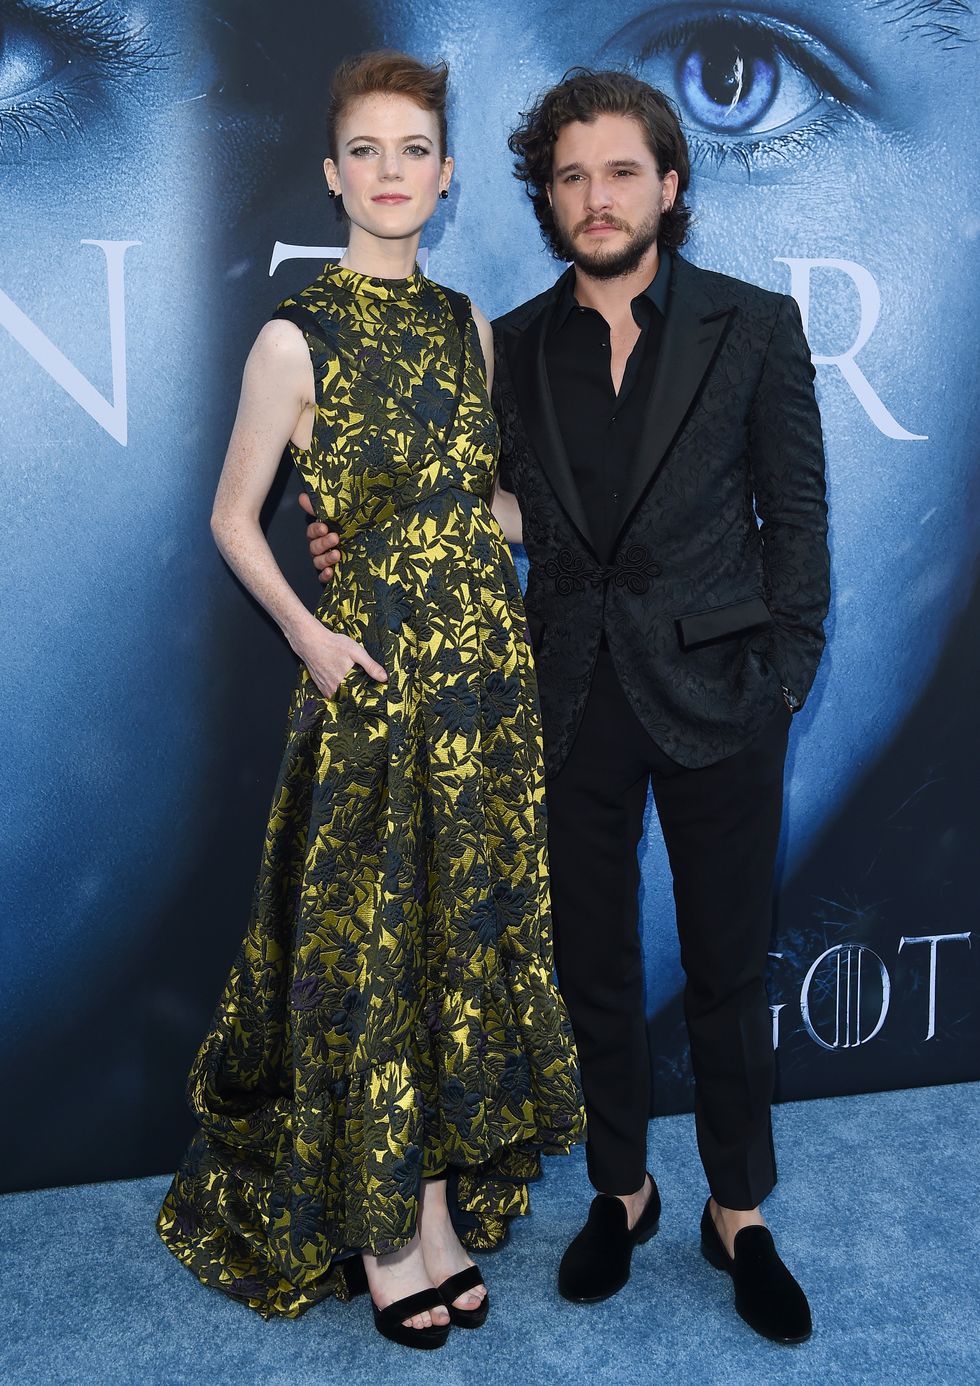 LOS ANGELES, CA - JULY 12:  Actors Rose Leslie and Kit Harington arrive at the premiere of HBO's 'Game Of Thrones' Season 7 at Walt Disney Concert Hall on July 12, 2017 in Los Angeles, California.  (Photo by Axelle/Bauer-Griffin/FilmMagic)